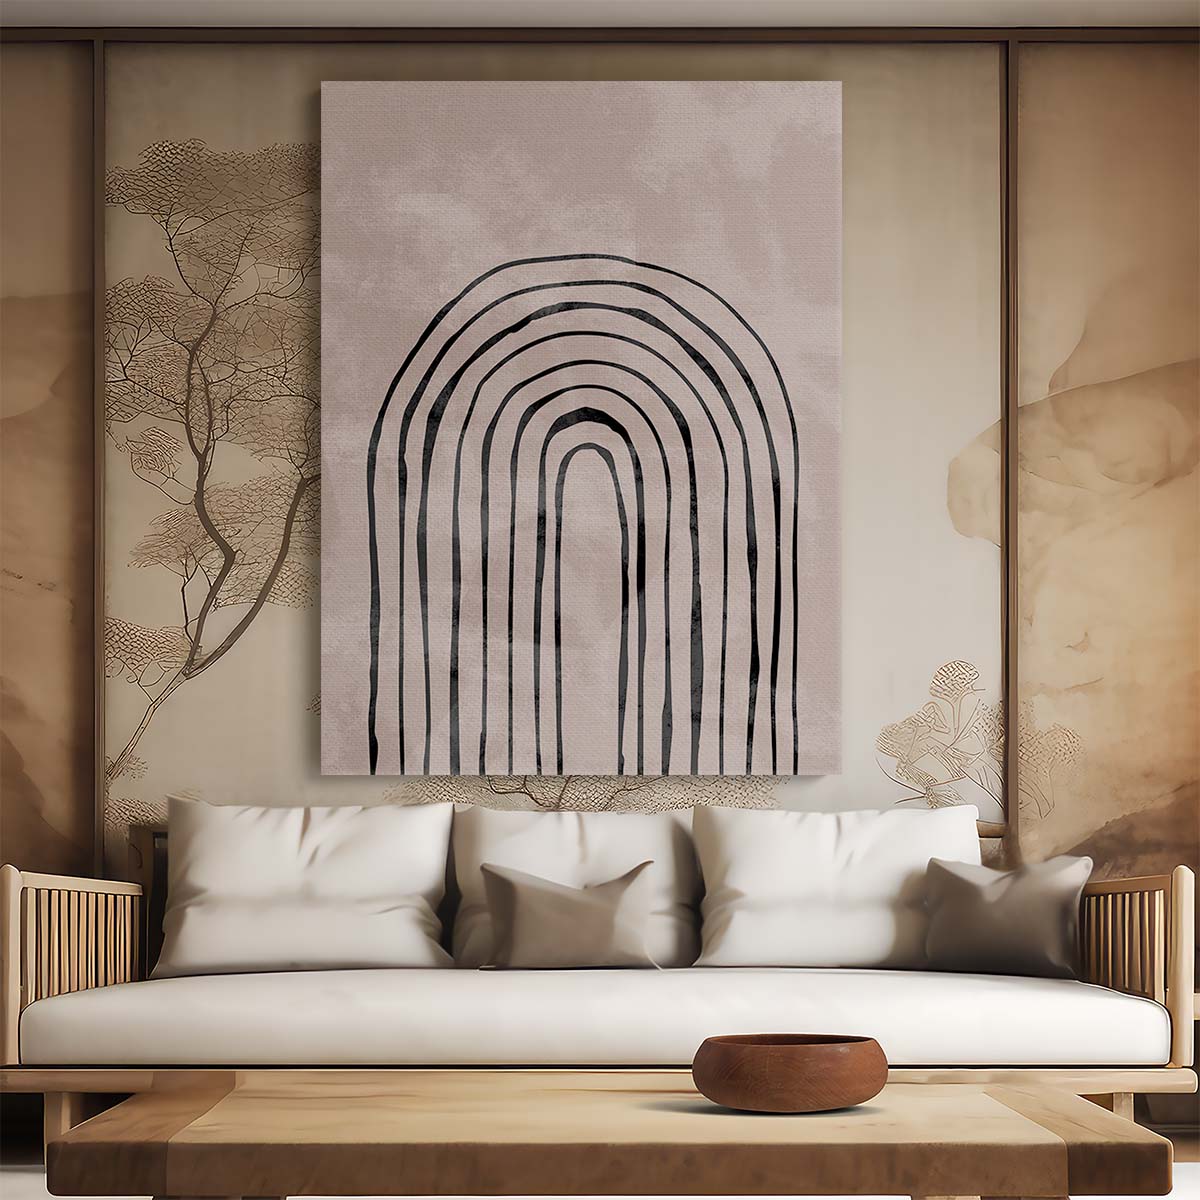 Abstract Geometric Arch Illustration - Beige Symmetrical Graphic Wall Art by Luxuriance Designs, made in USA